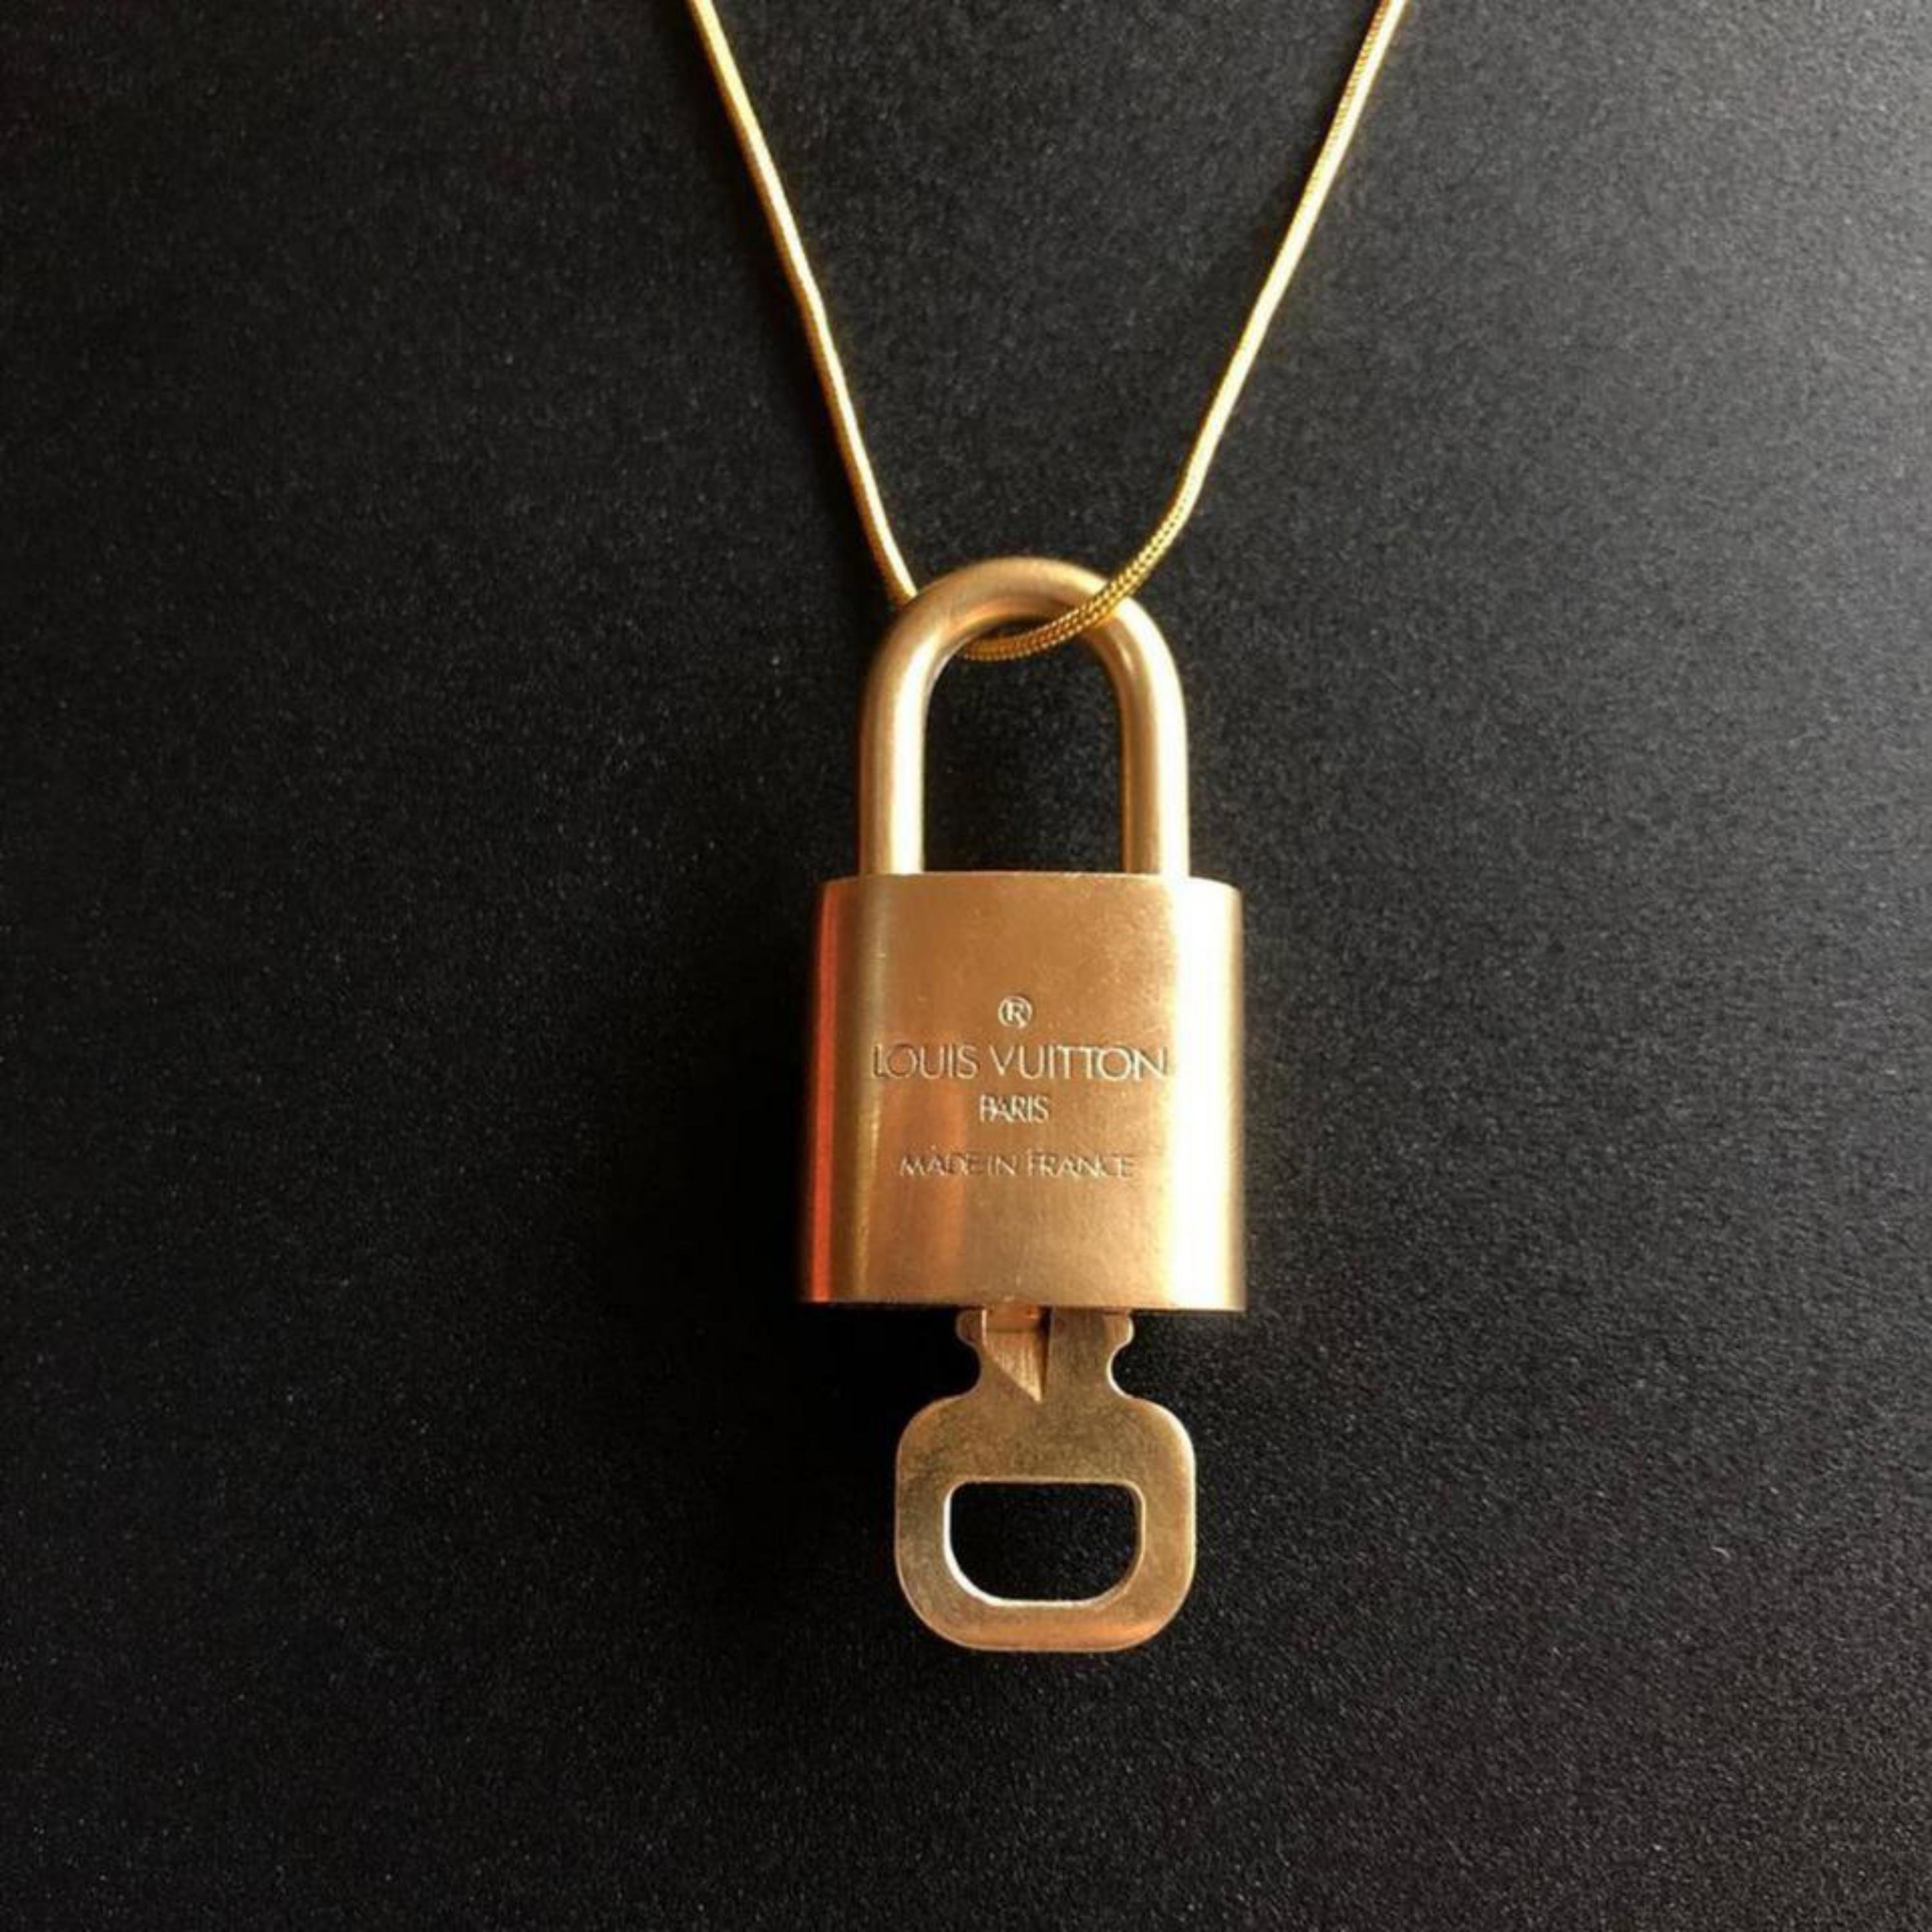 Louis Vuitton Gold Single Key Lock Pad Lock and Key 867732 For Sale 4